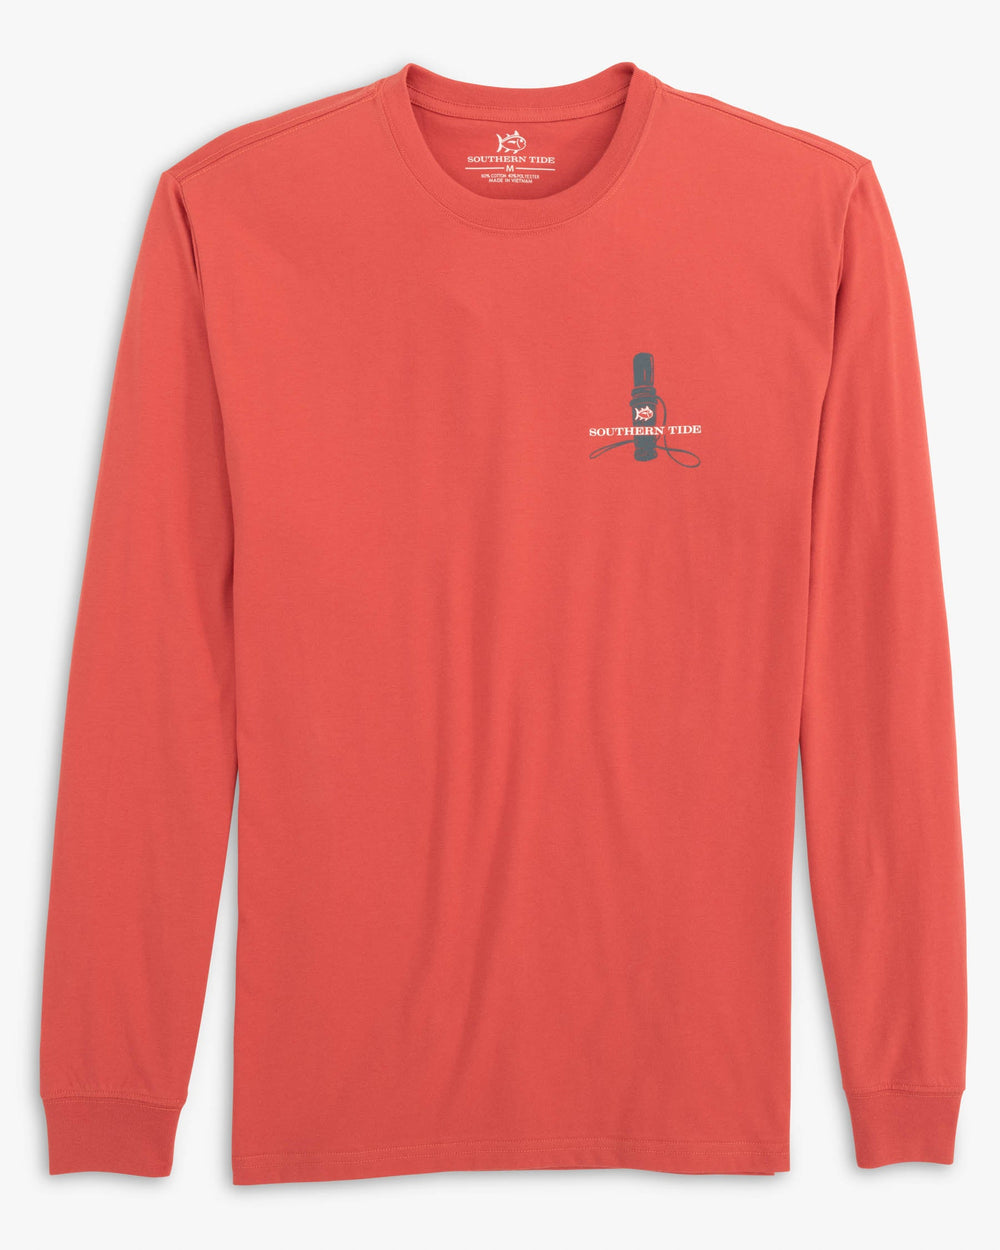 The front view of the Fowl Call Series Long Sleeve T-Shirt Pheasant by Southern Tide - Mineral Red